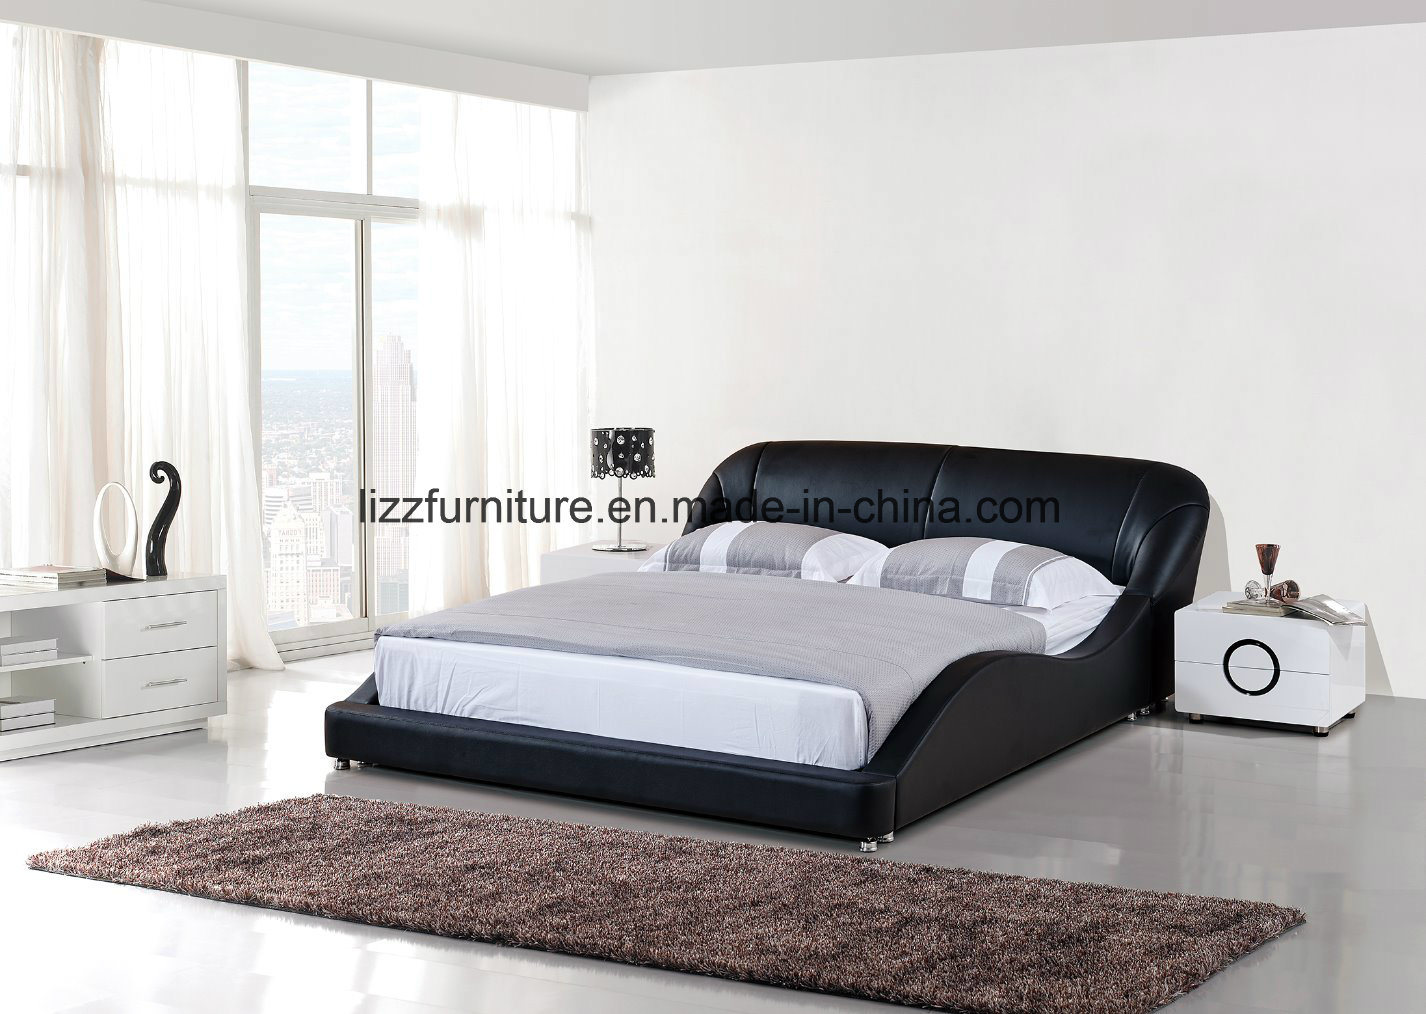 LED Leather Bed Lb2212